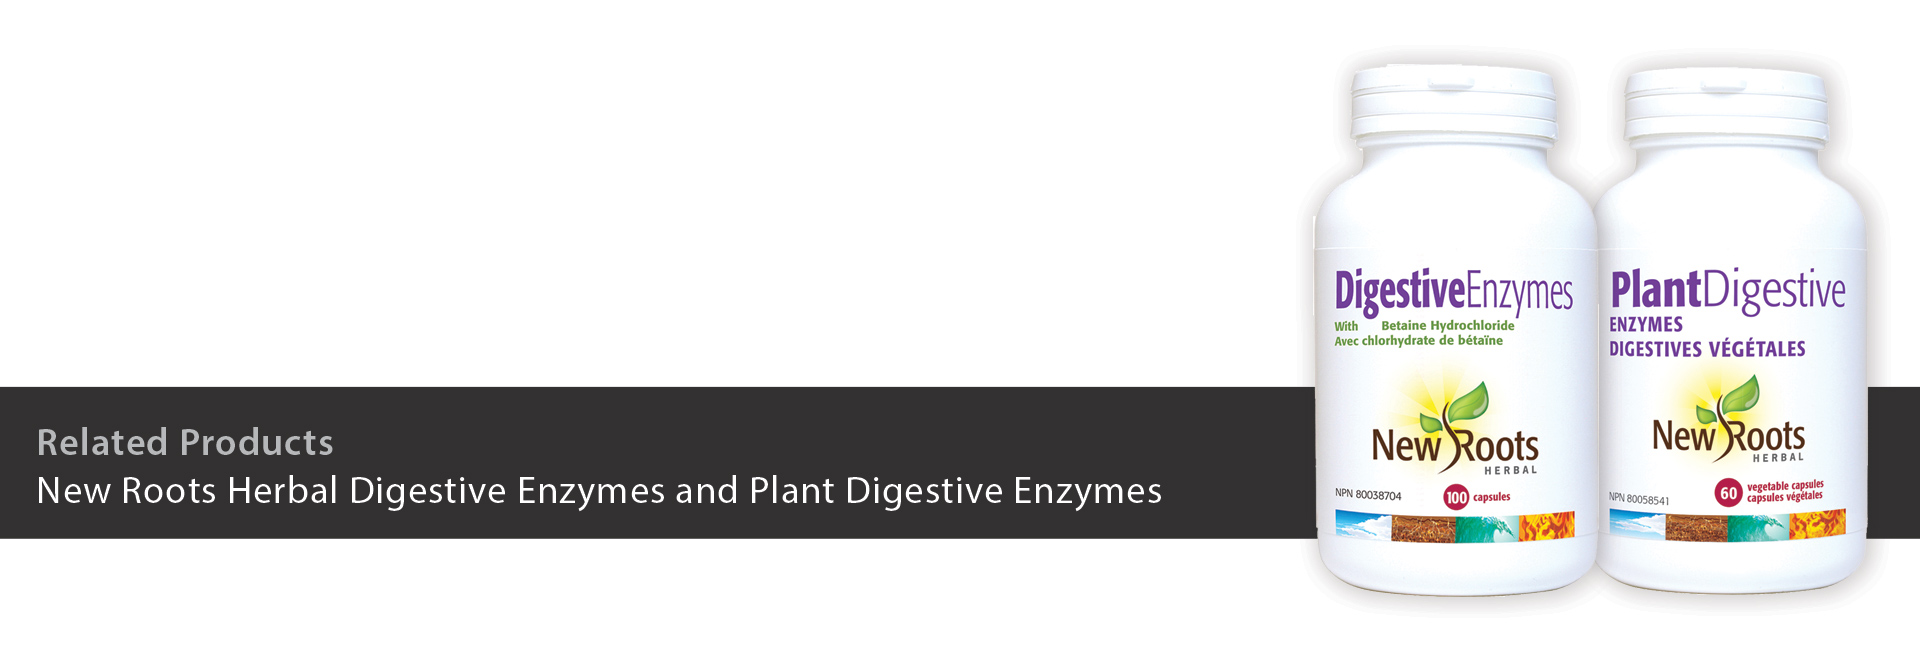 New Roots Herbal Digestive Enzymes and Plant Digestive Enzymes